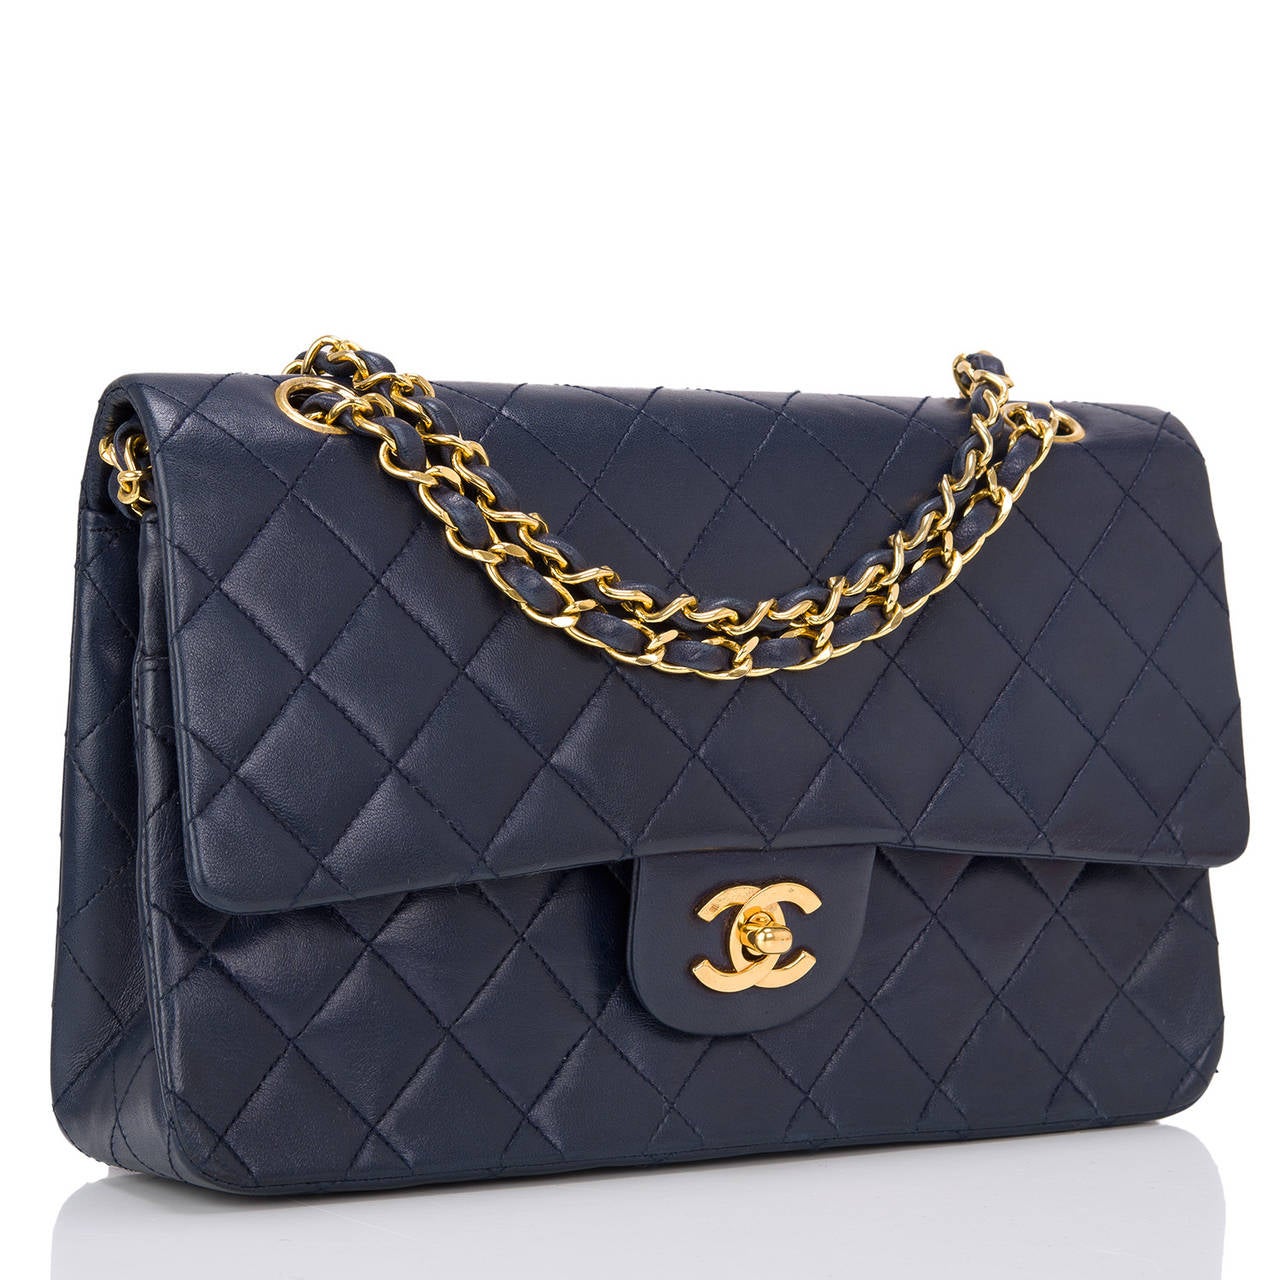 This rare and beautiful vintage Chanel Navy Large Classic double flap bag made of quilted lambskin leather with gold tone hardware. As with all Chanel classic bags, this stunning bag features a front flap with signature CC turnlock closure, half